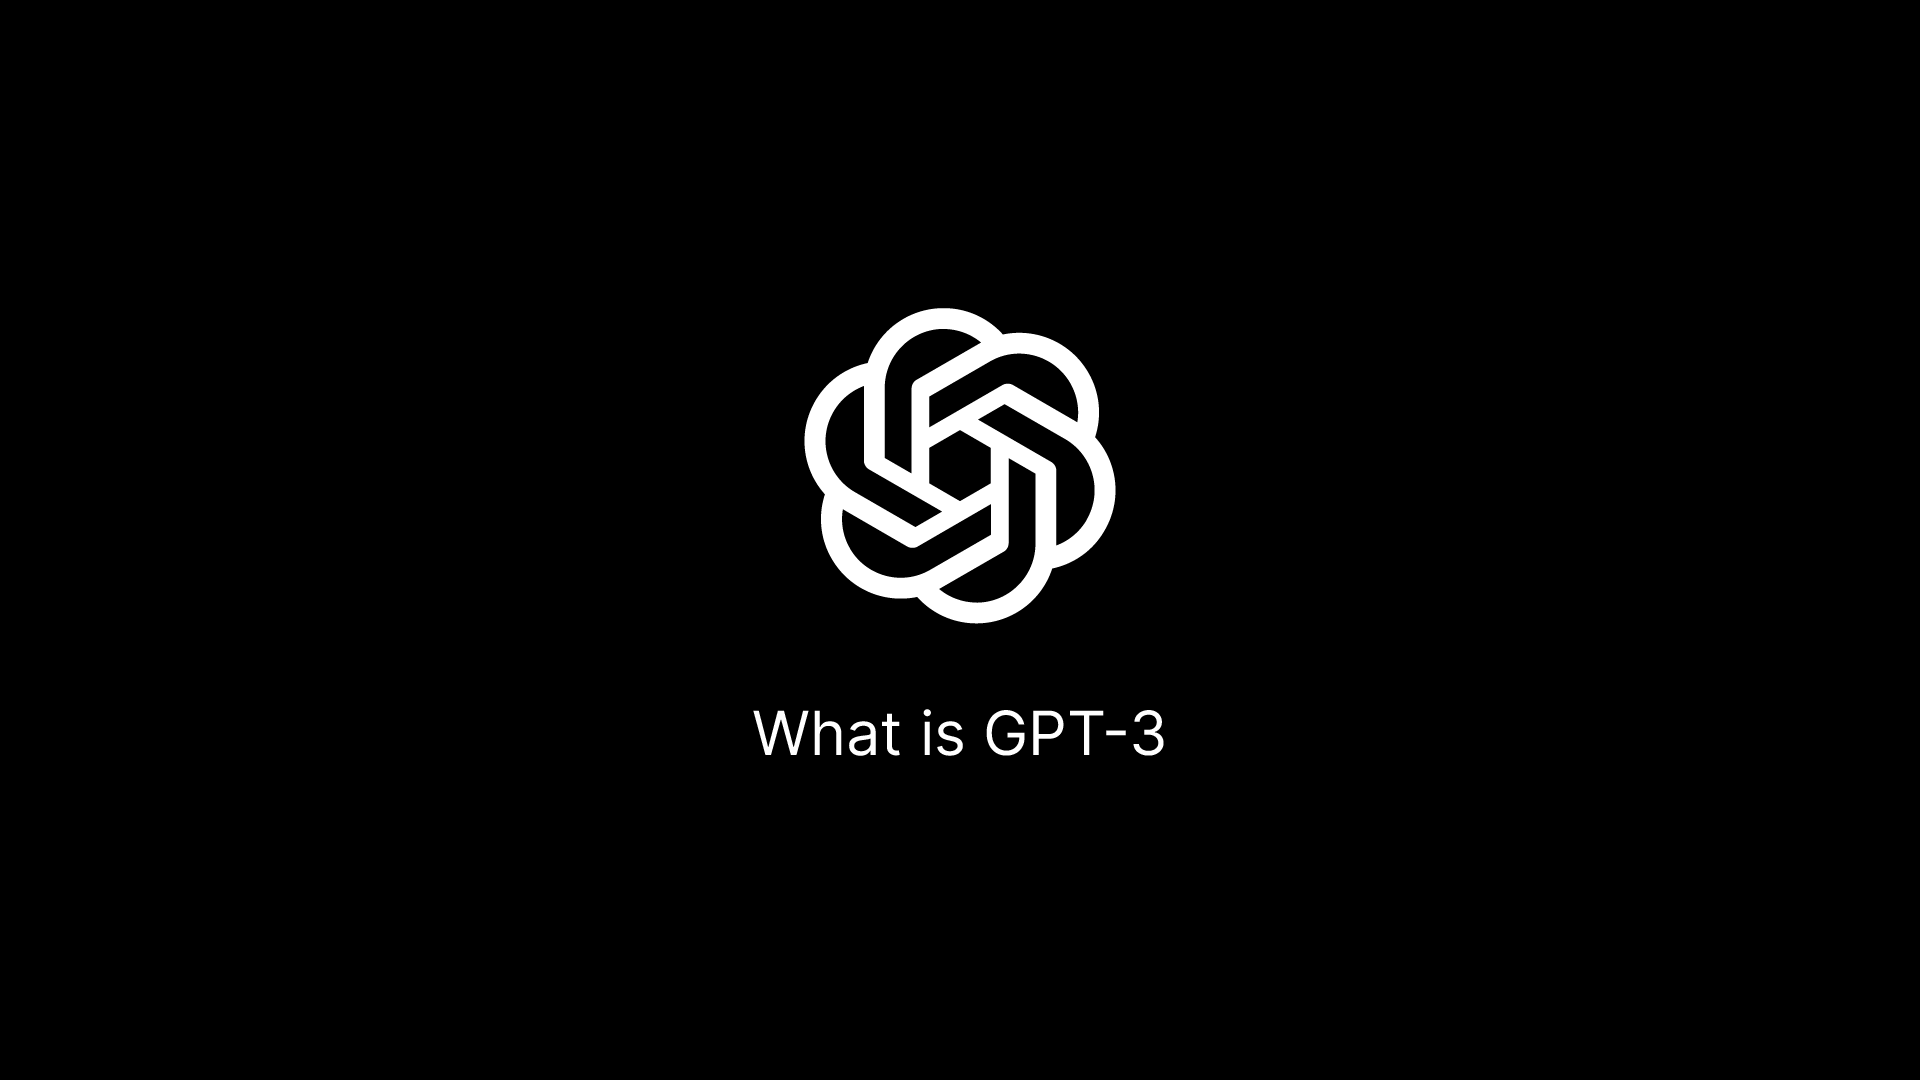 What is GPT-3